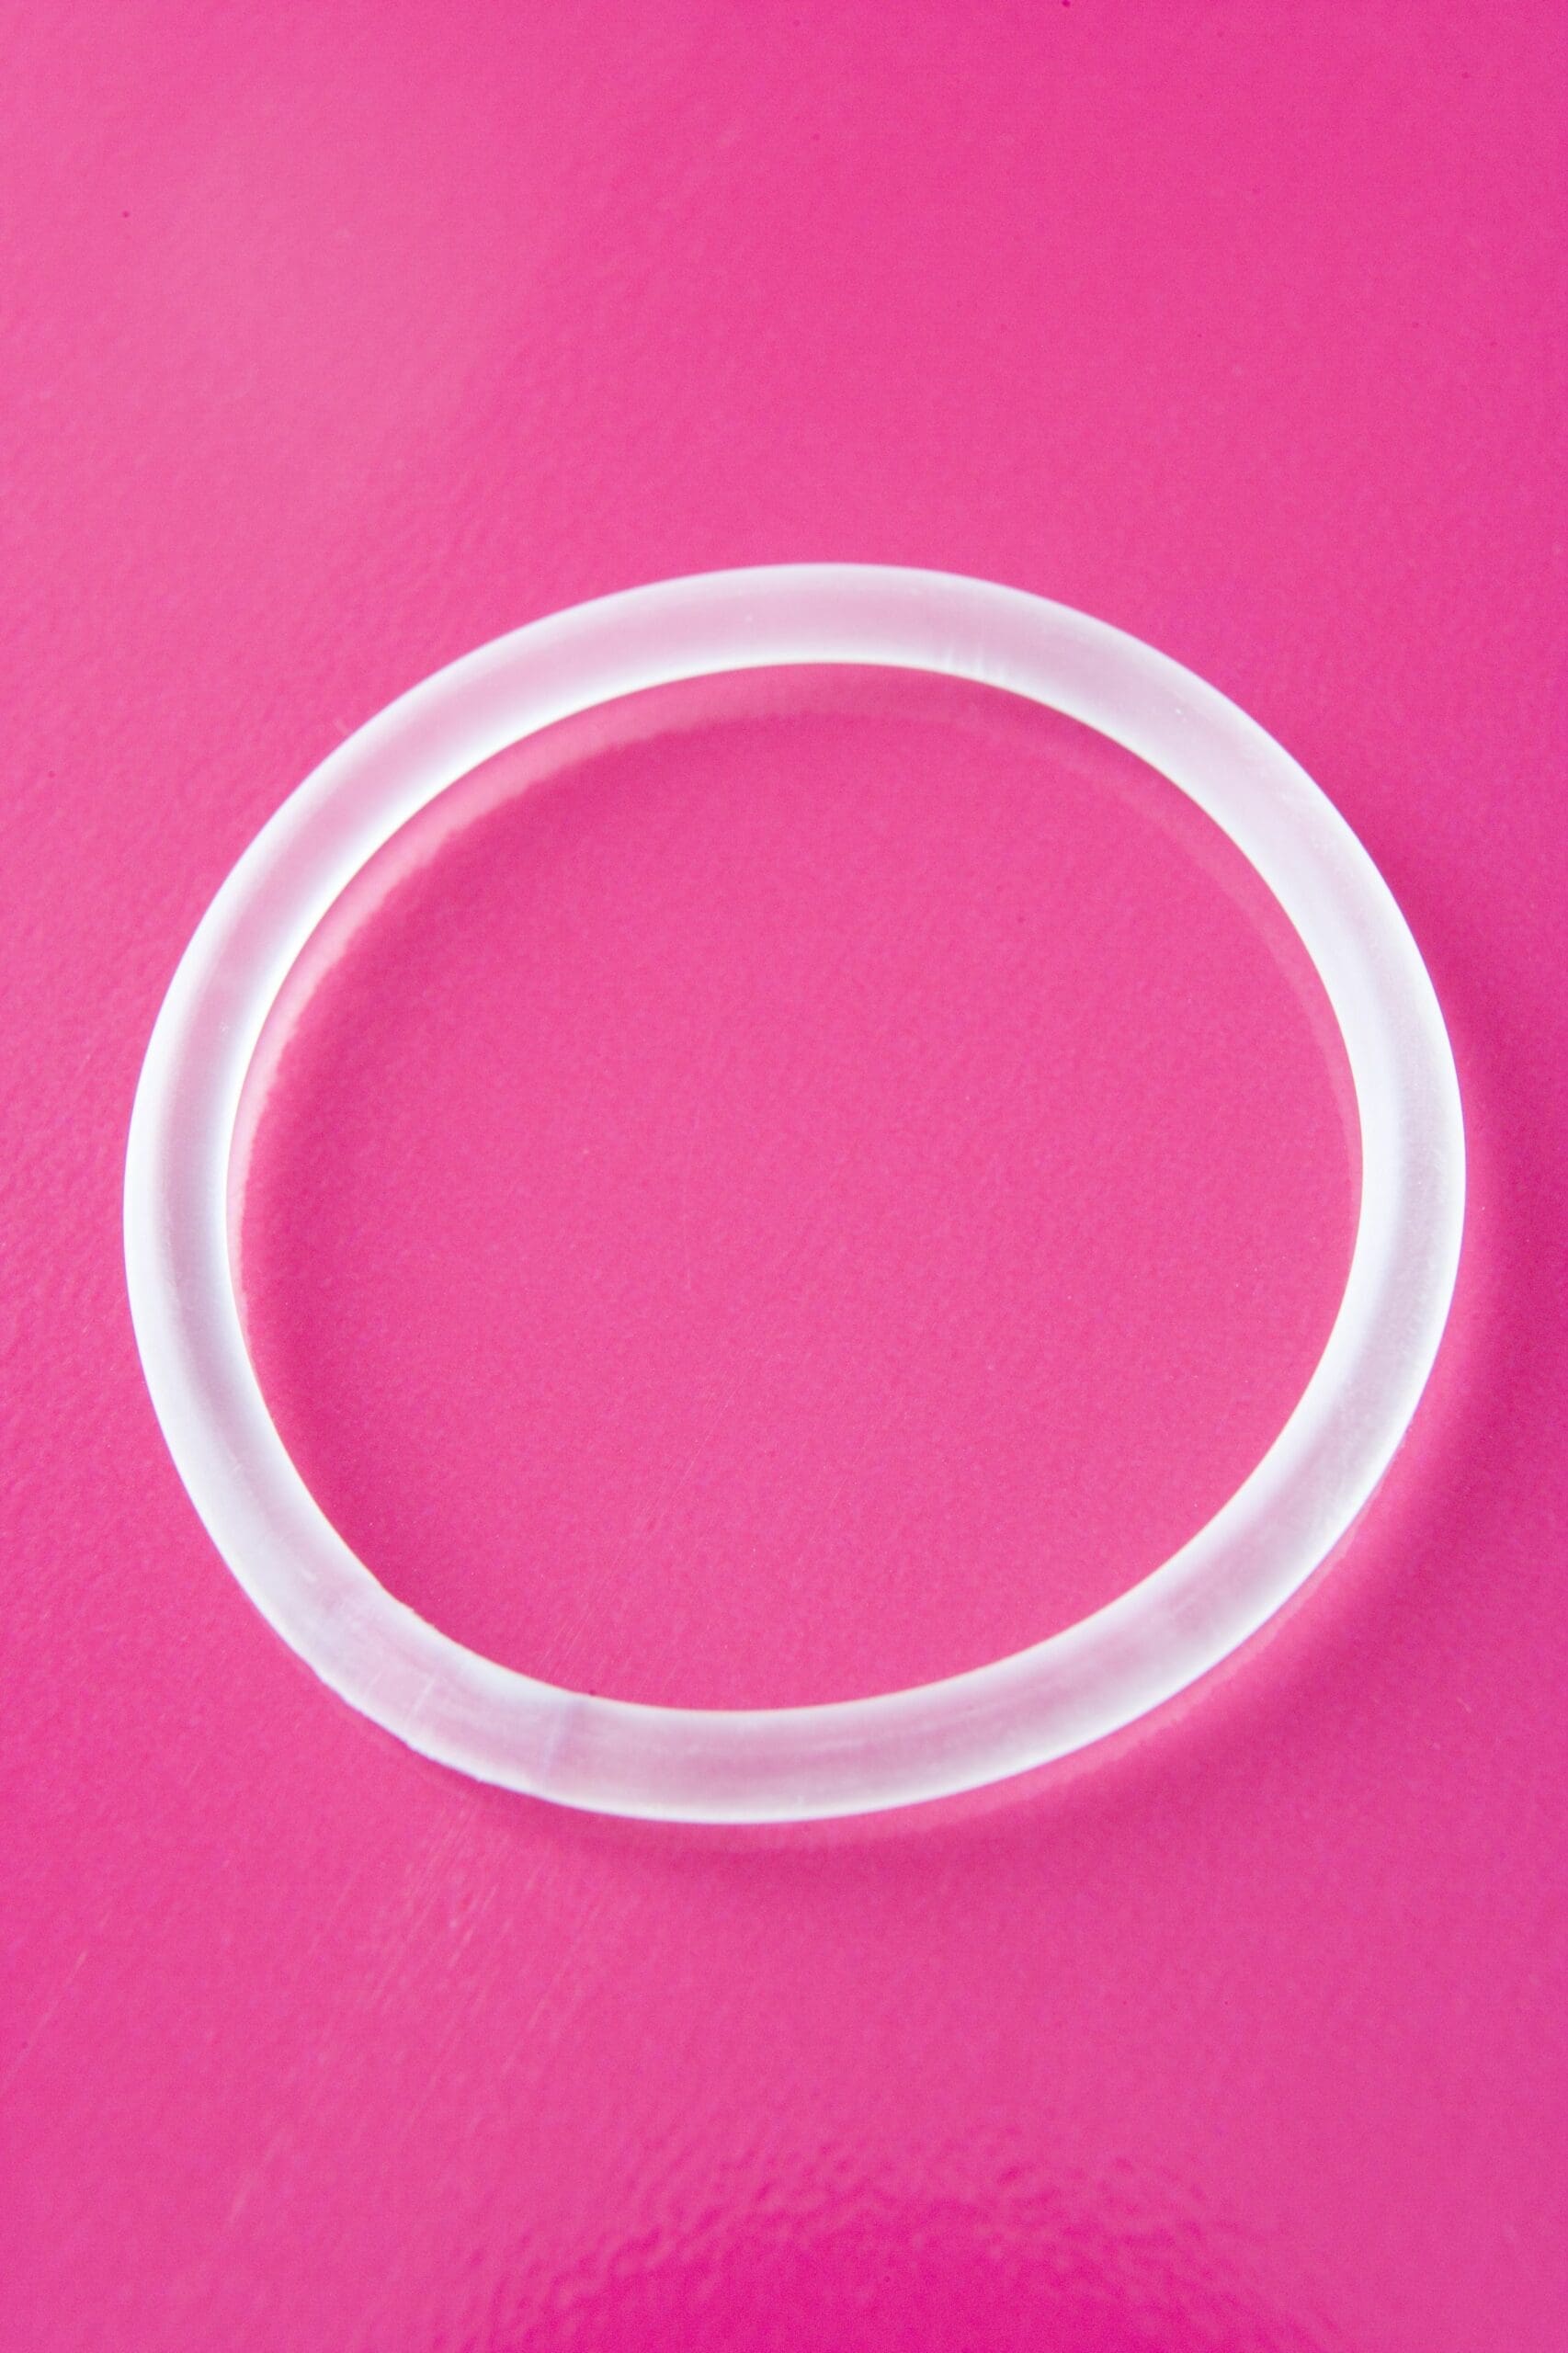 Contraception: vaginal ring